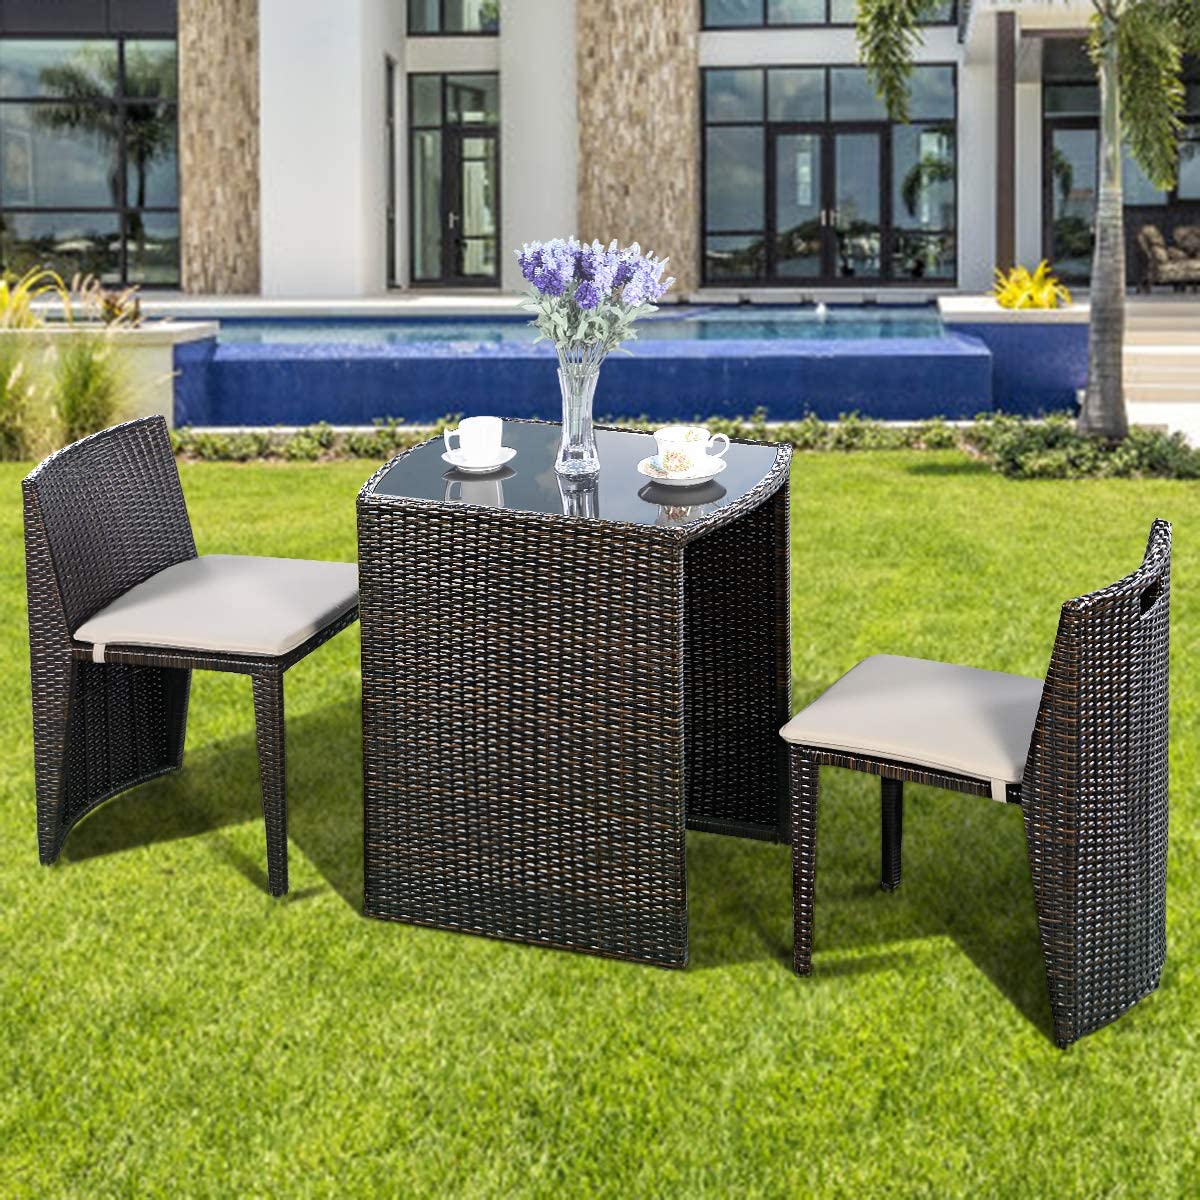 3 Pieces Outdoor Wicker Conversation Bistro Set Patio Dining sets with Cushion